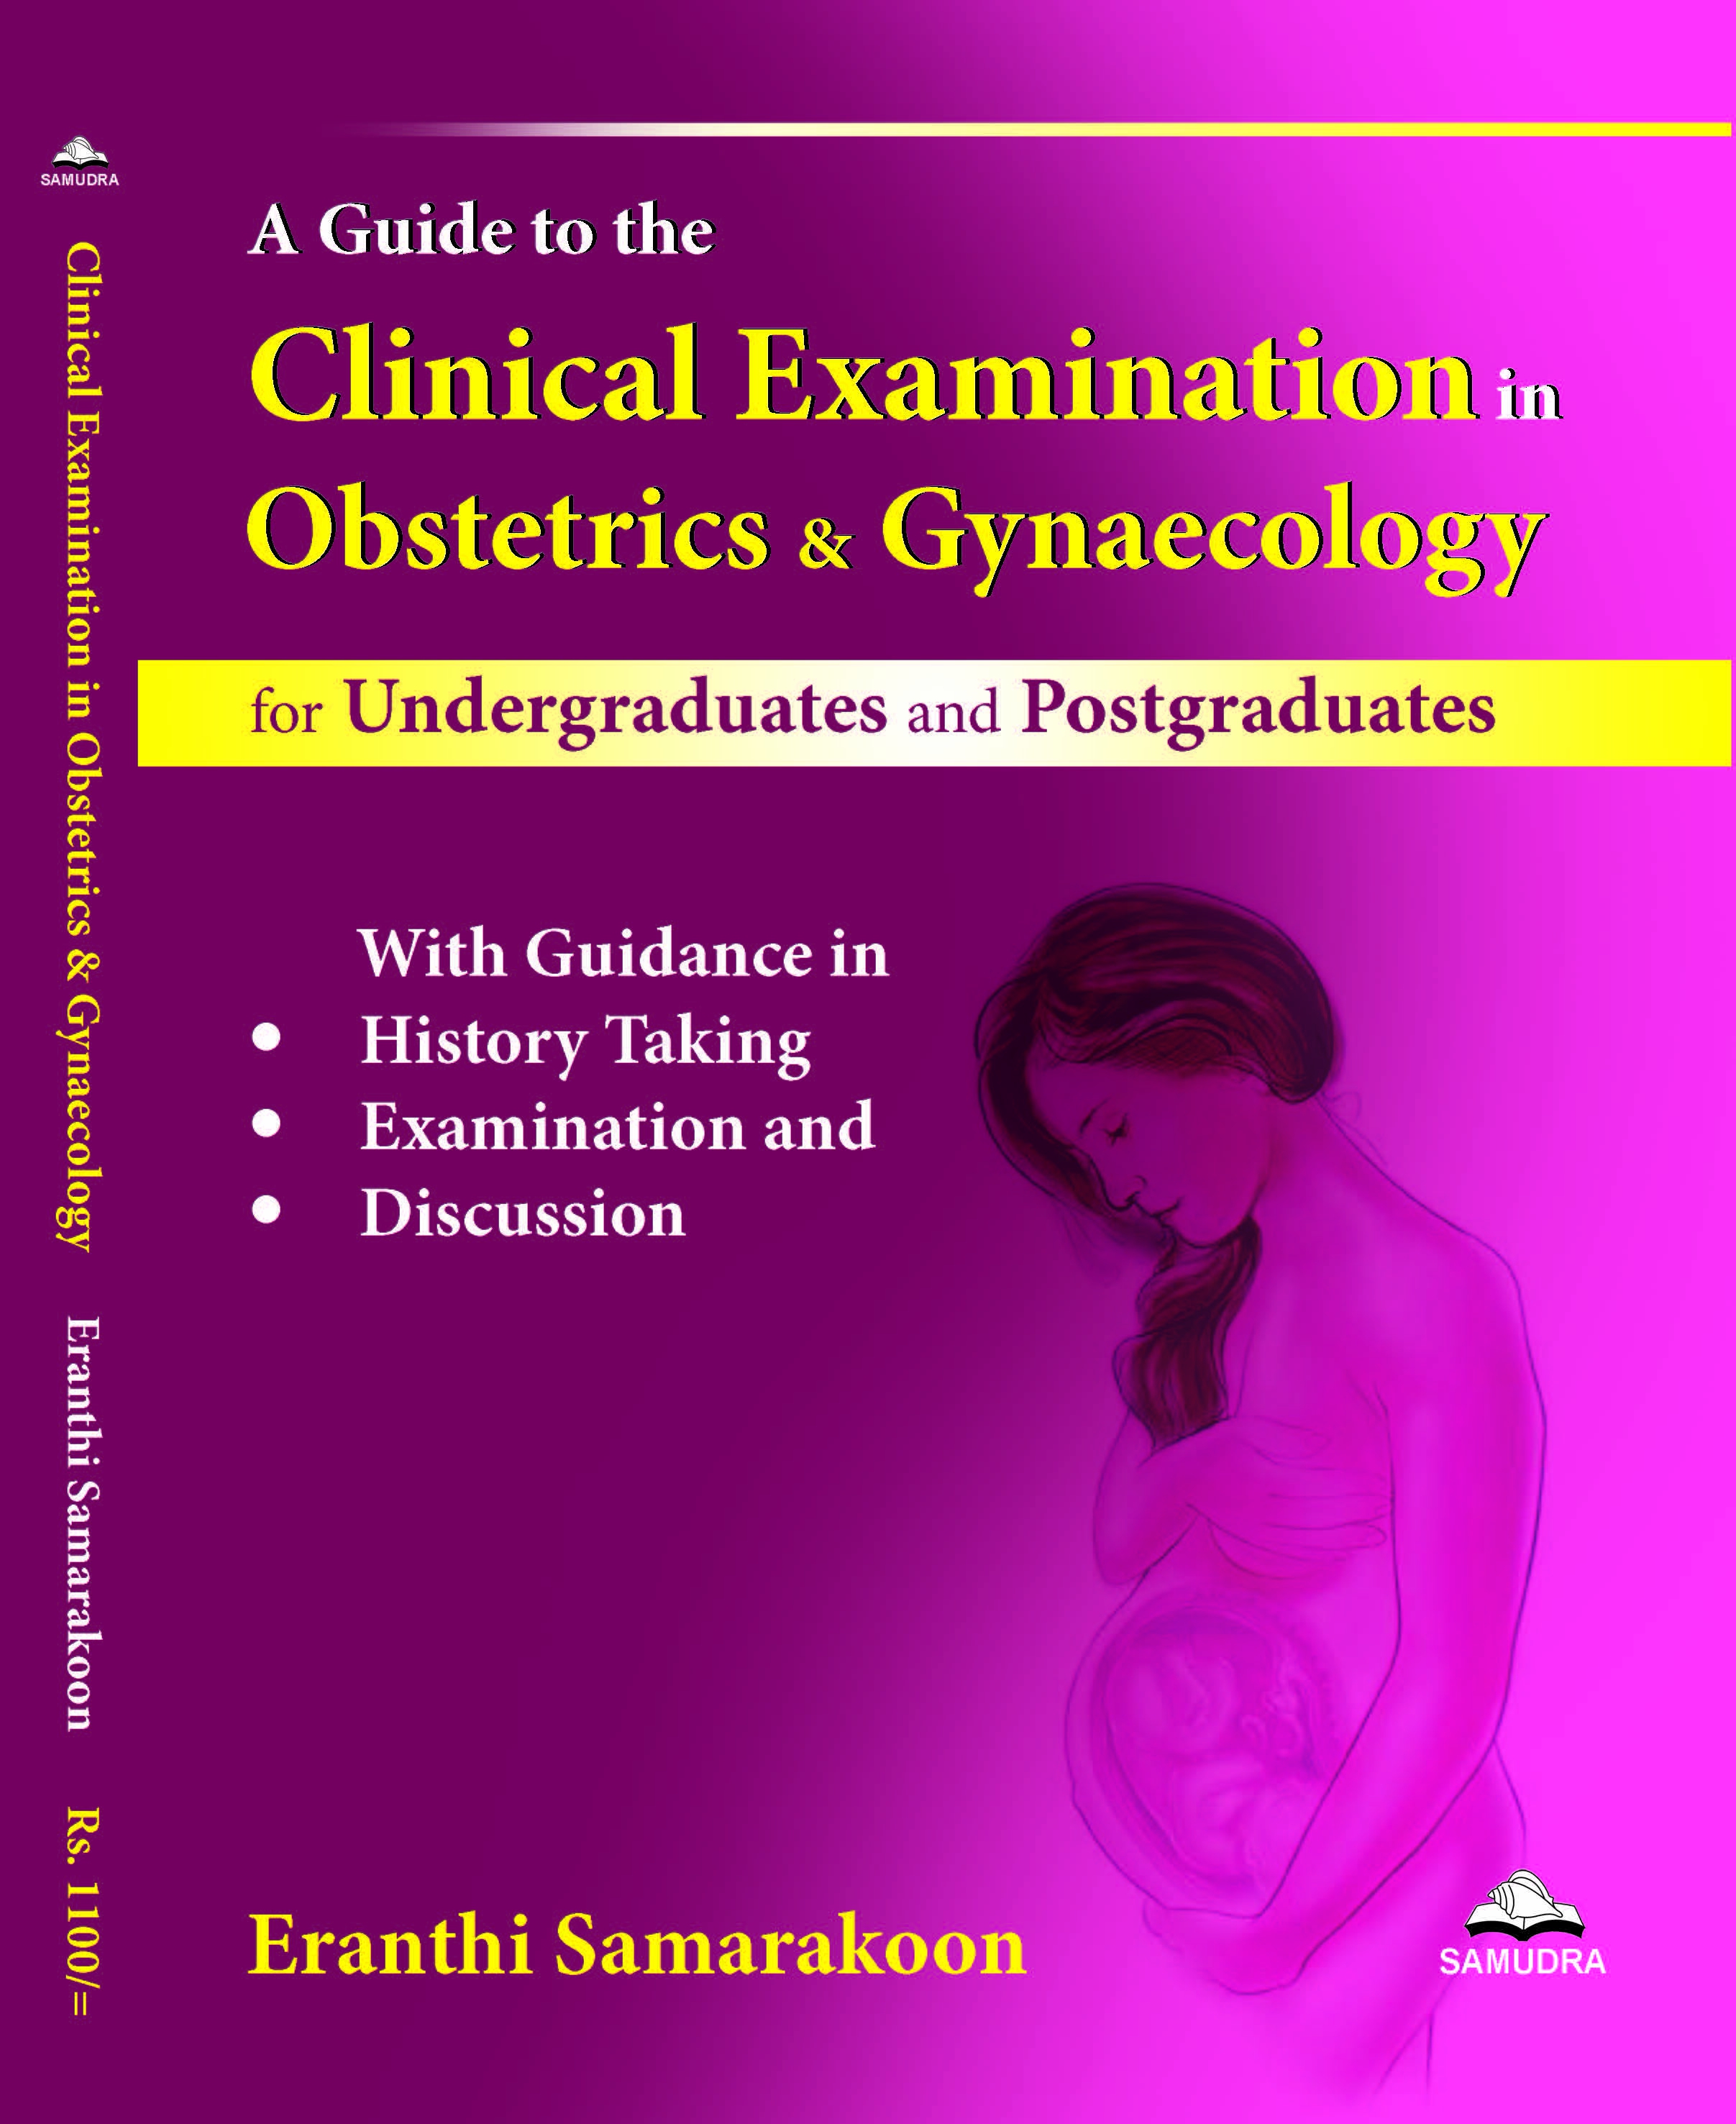 A Guide to The Clinical Examination in Obstetrics and Gynaecology for Undergraduates and Postgraduates